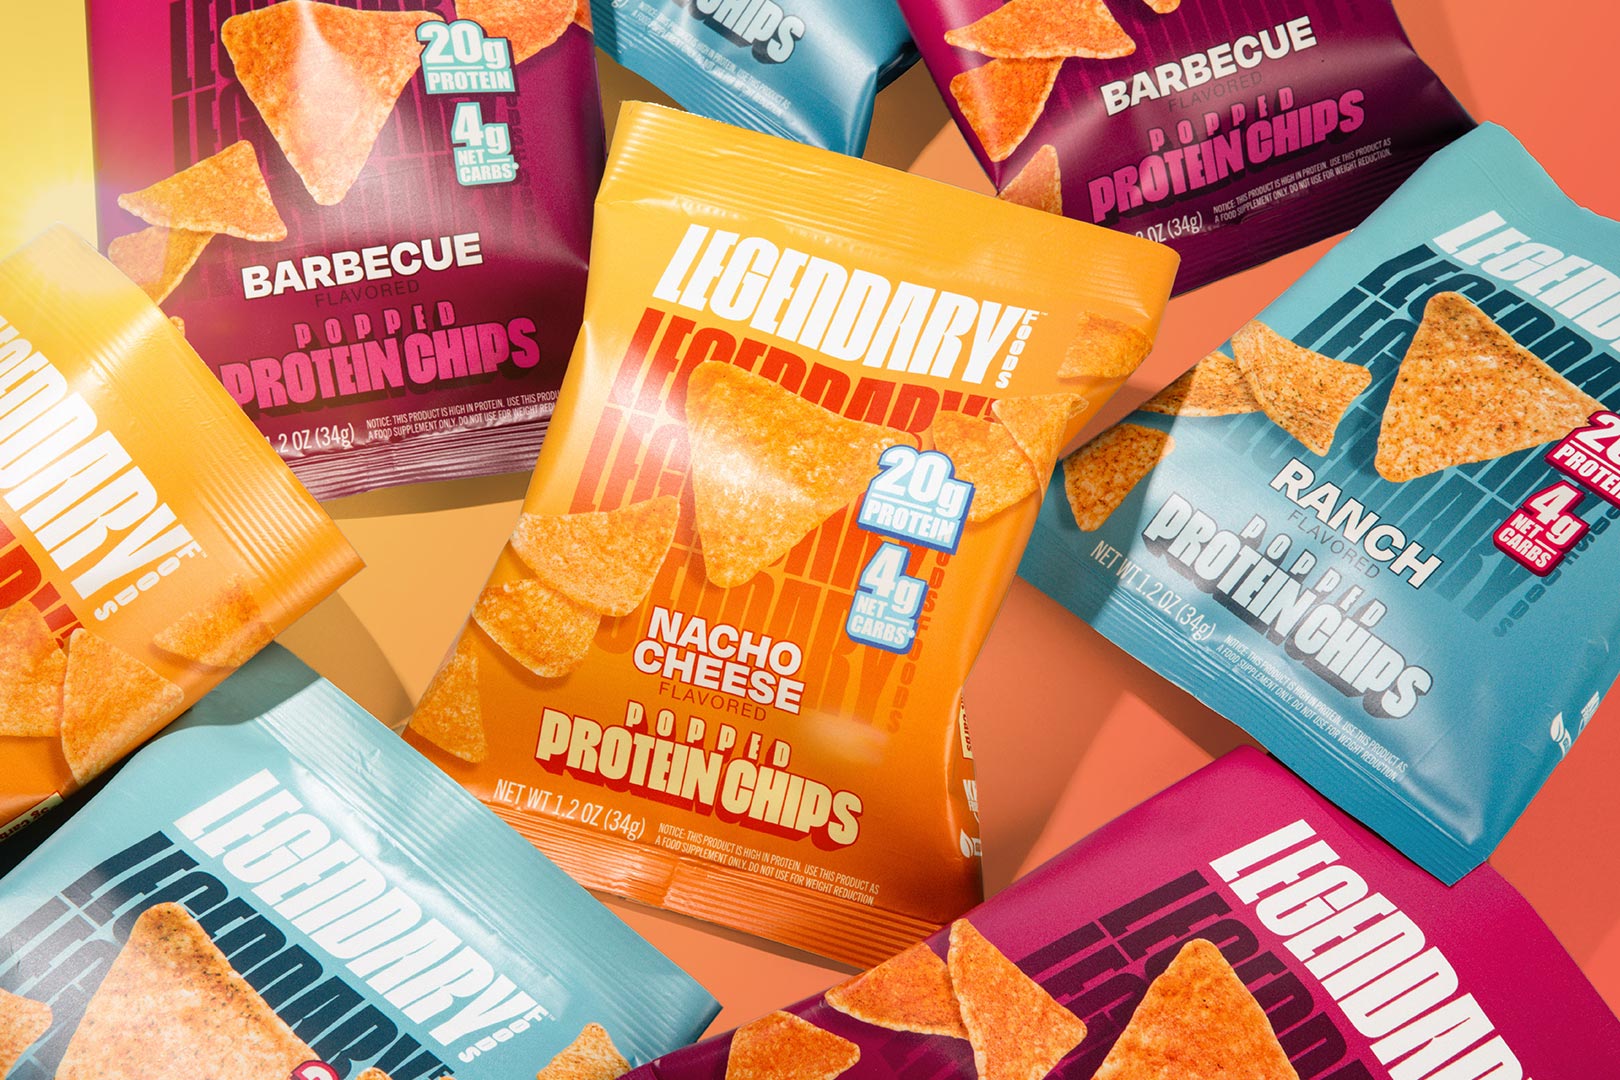 Where to buy Legendary Protein Chips